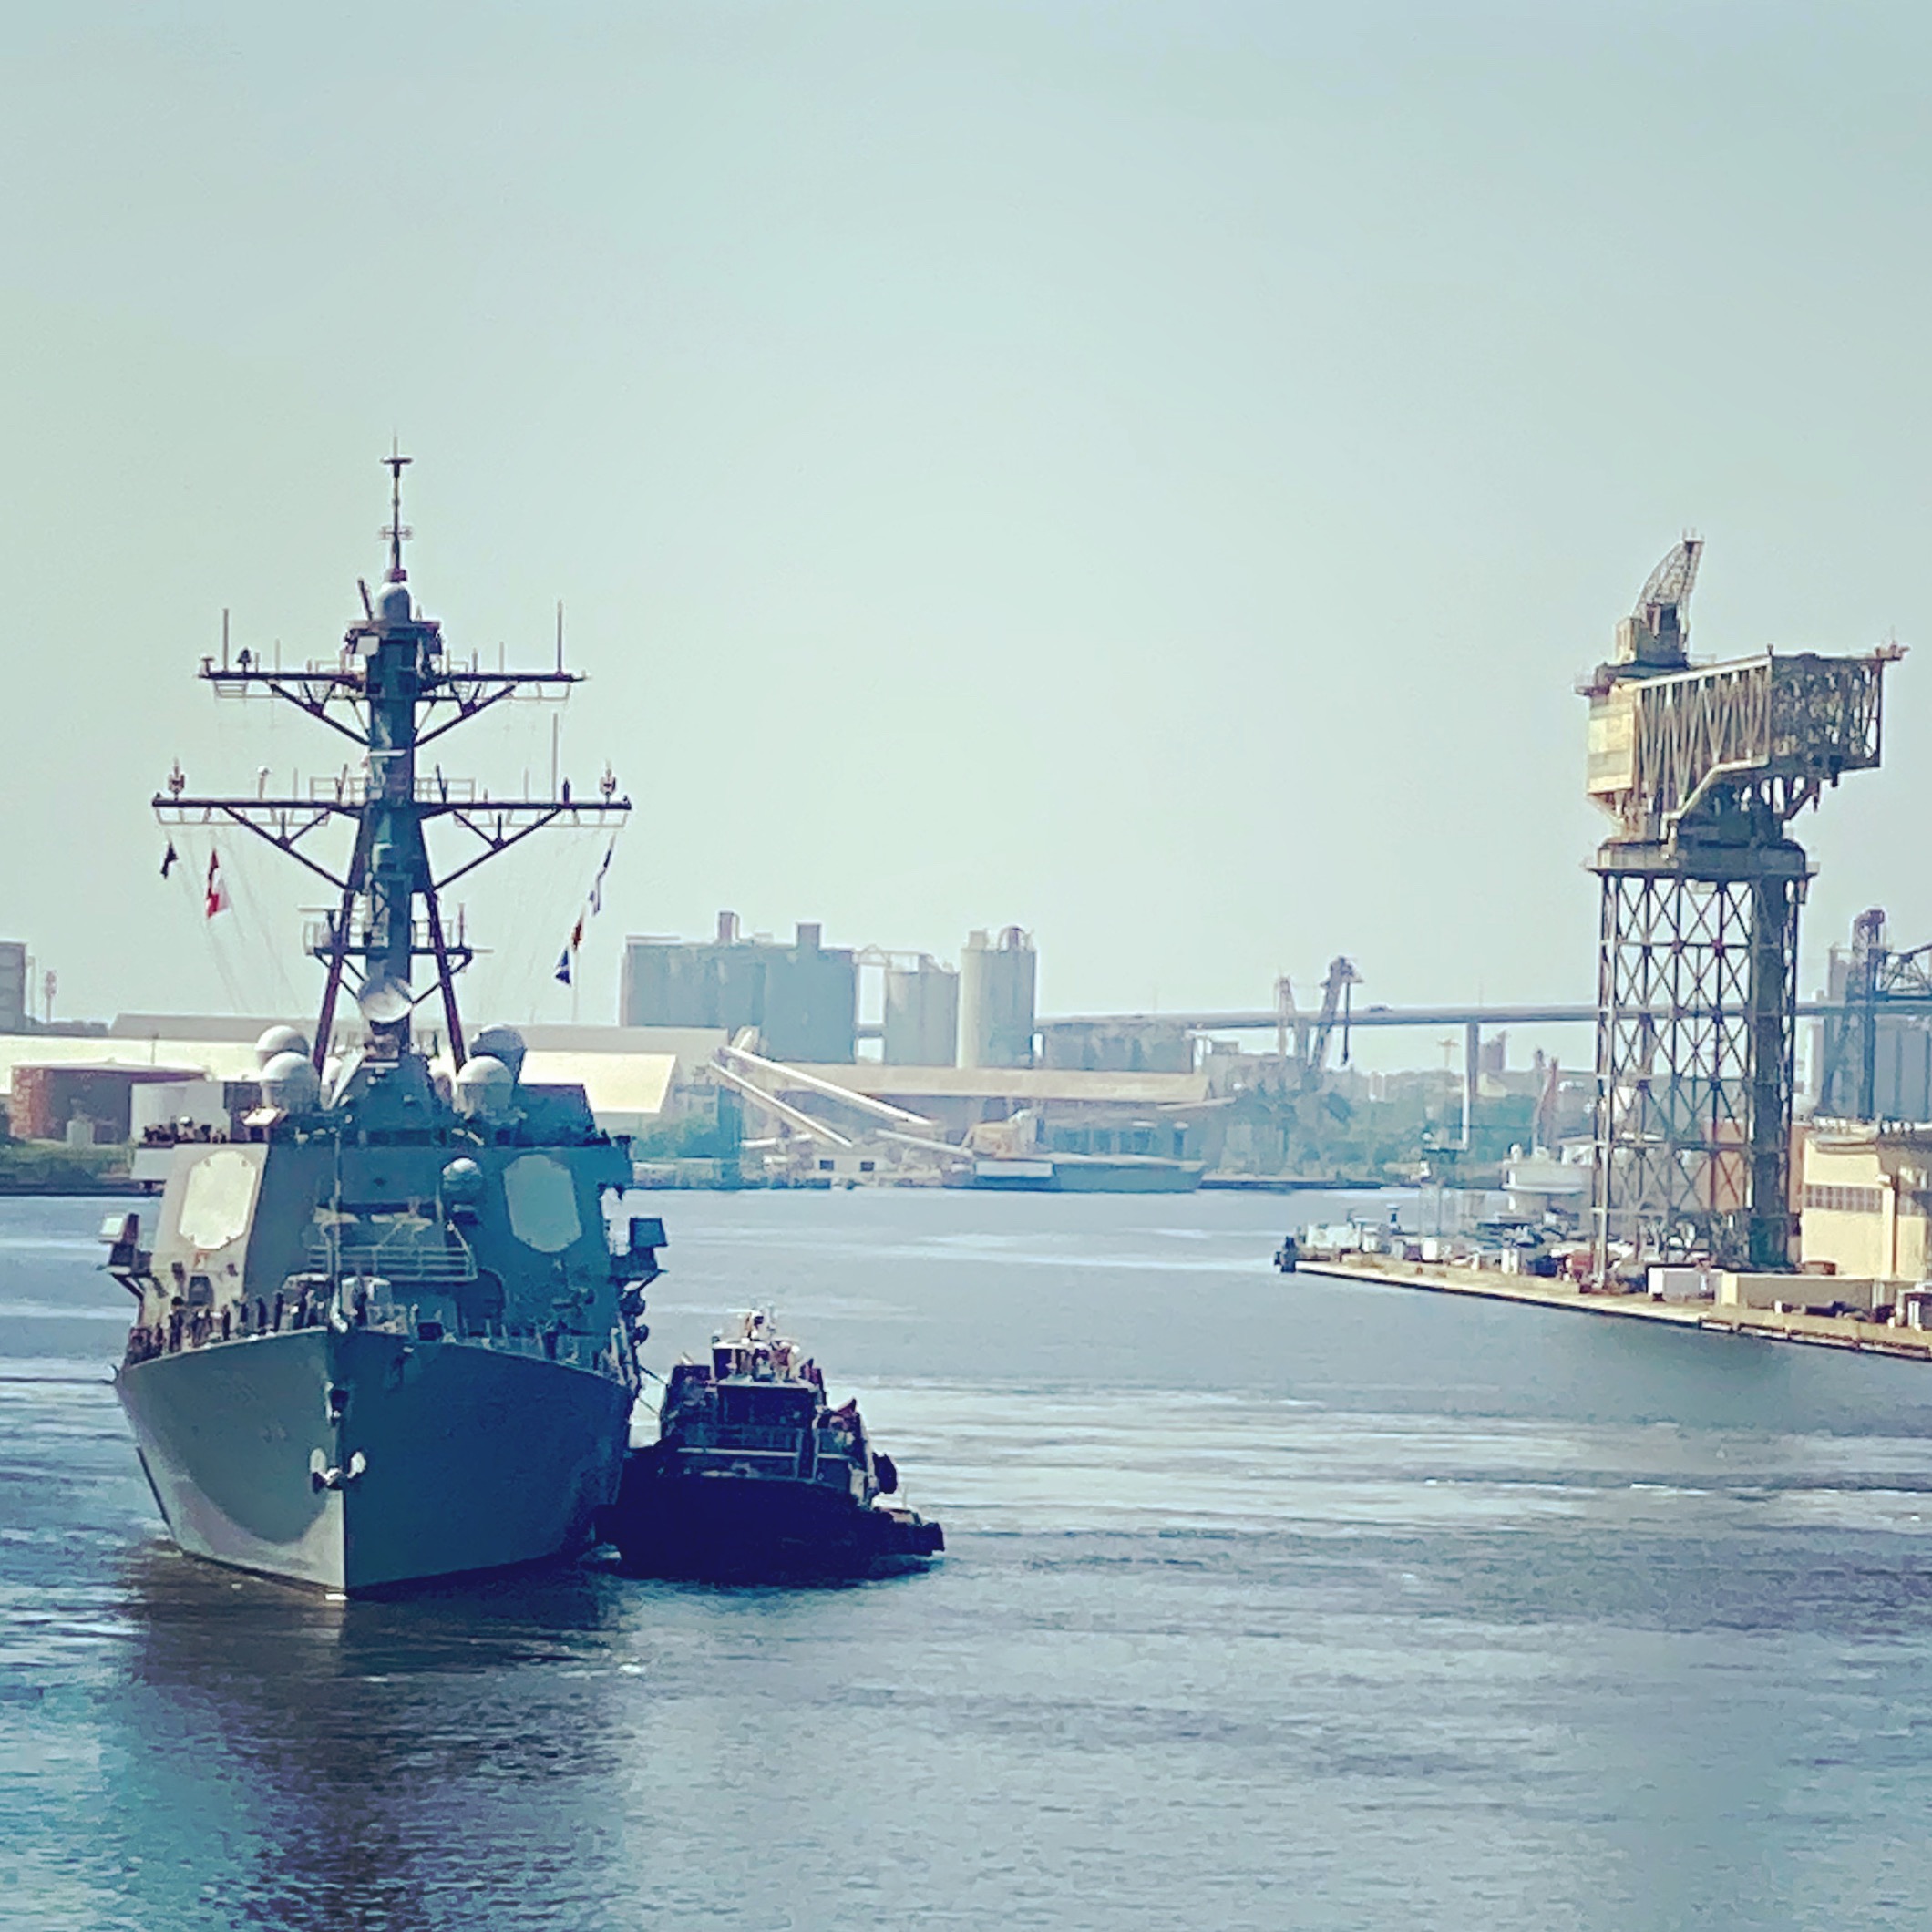 Navy ship on the Elizabeth River with Hammerhead Crane in background